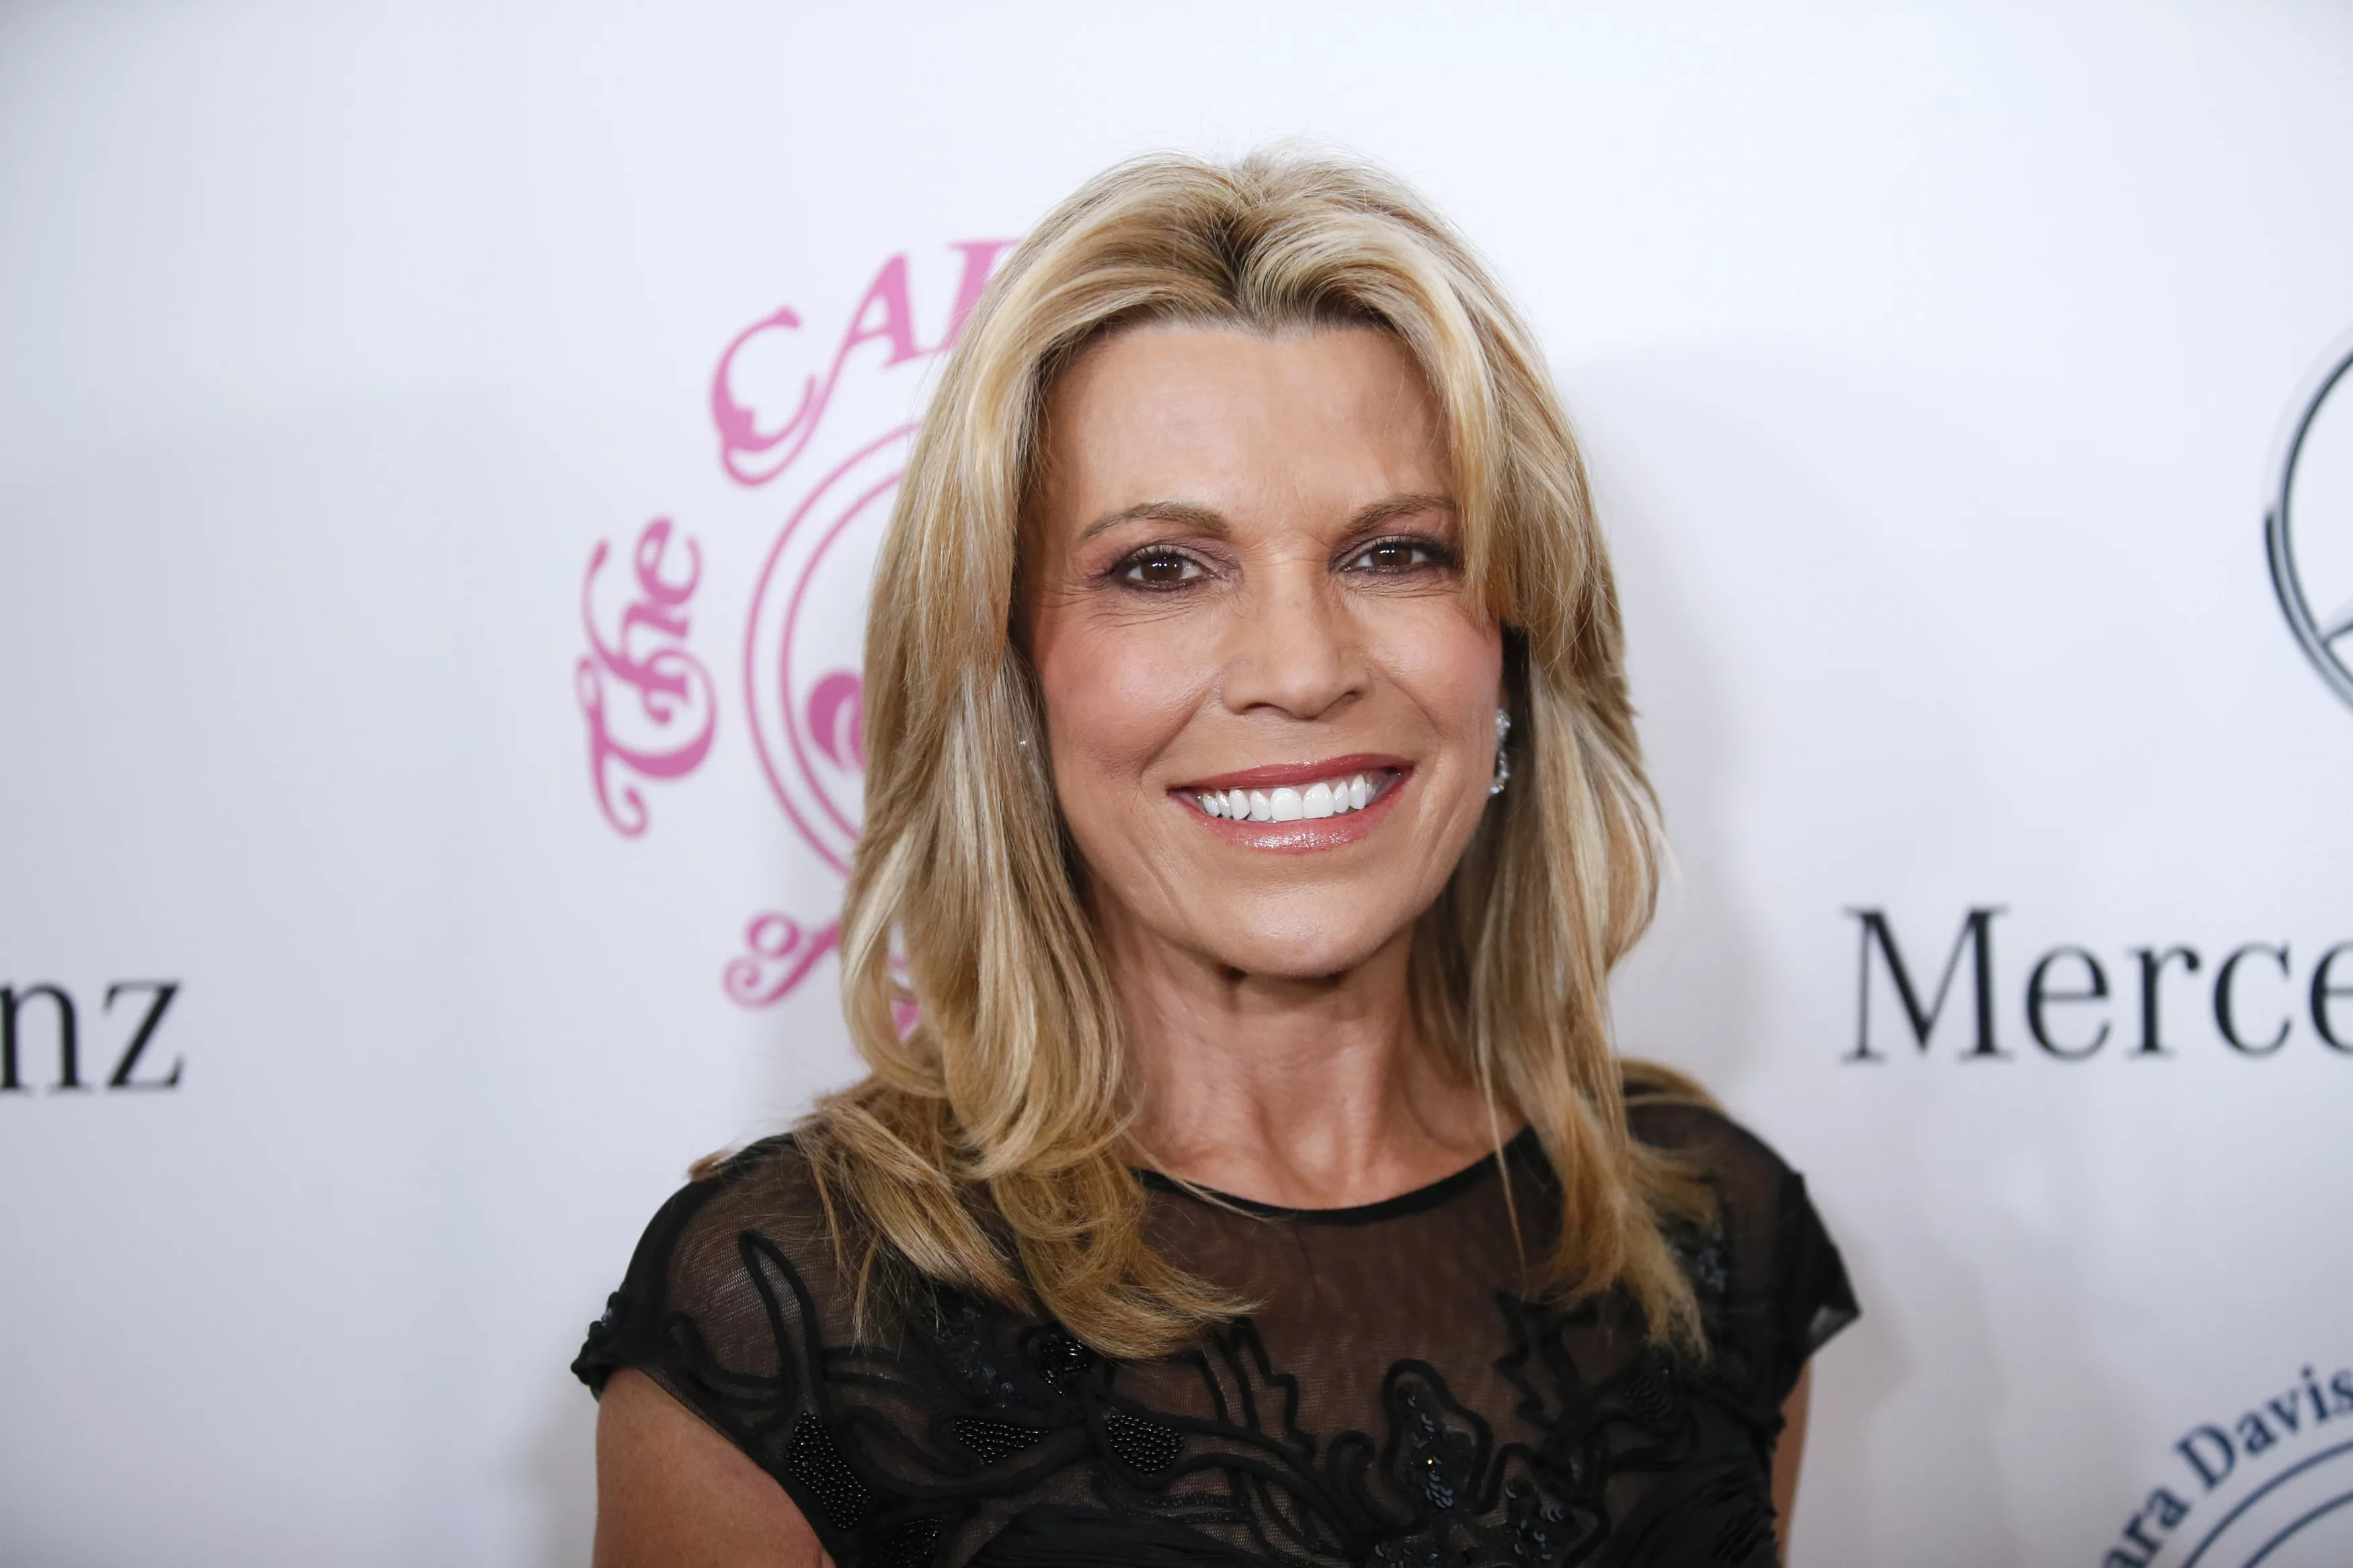 television-personality-vanna-white-poses-at-the-mercedes-benz-carousel-of-hope-ball-to-benefit-the-barbara-davis-center-for-diabetes-in-beverly-hills-california